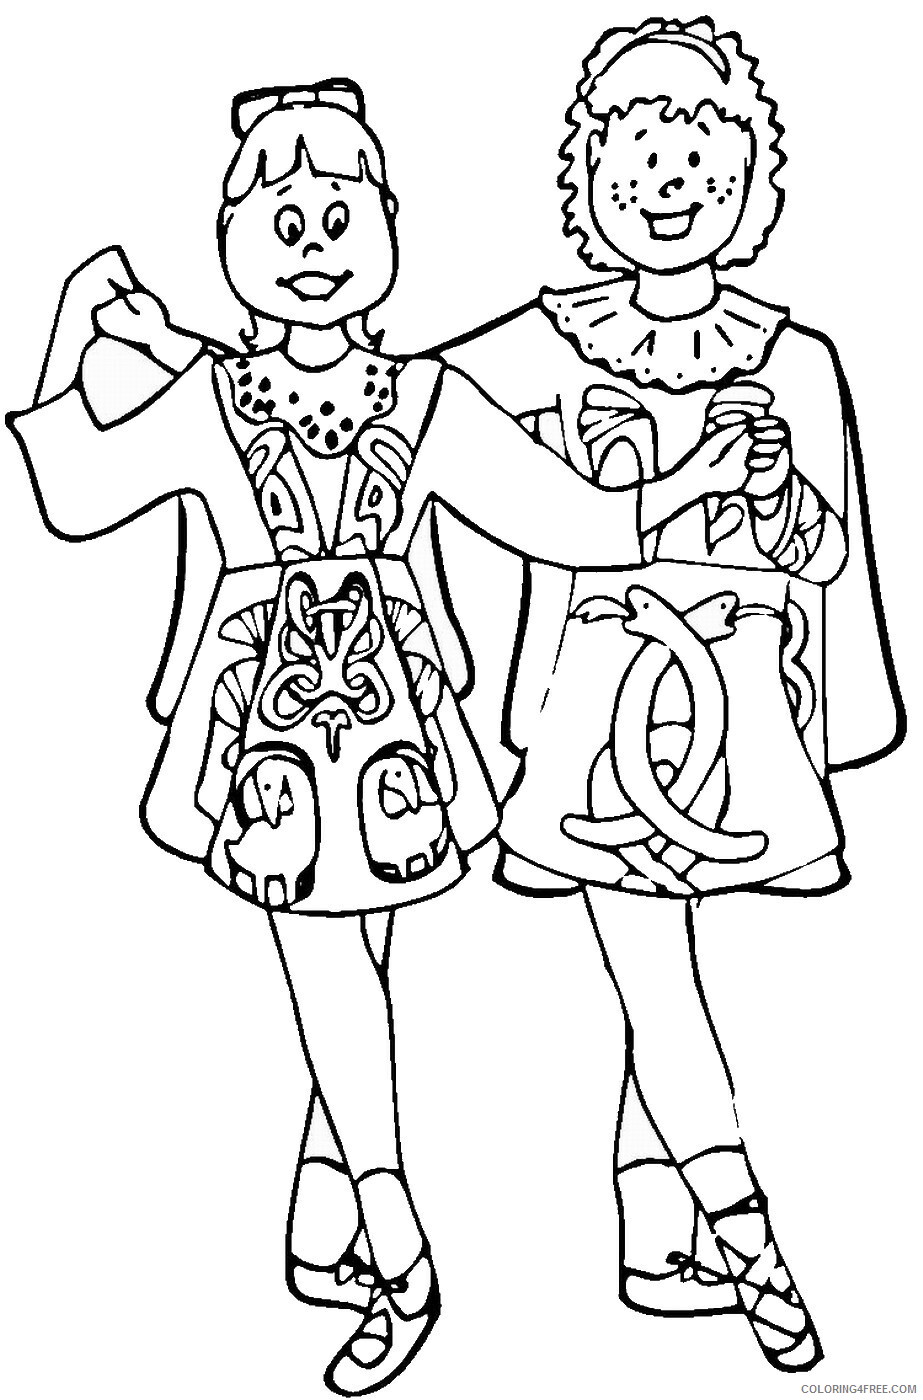 Around the World Coloring Pages around_world_85 Printable 2021 0308 Coloring4free